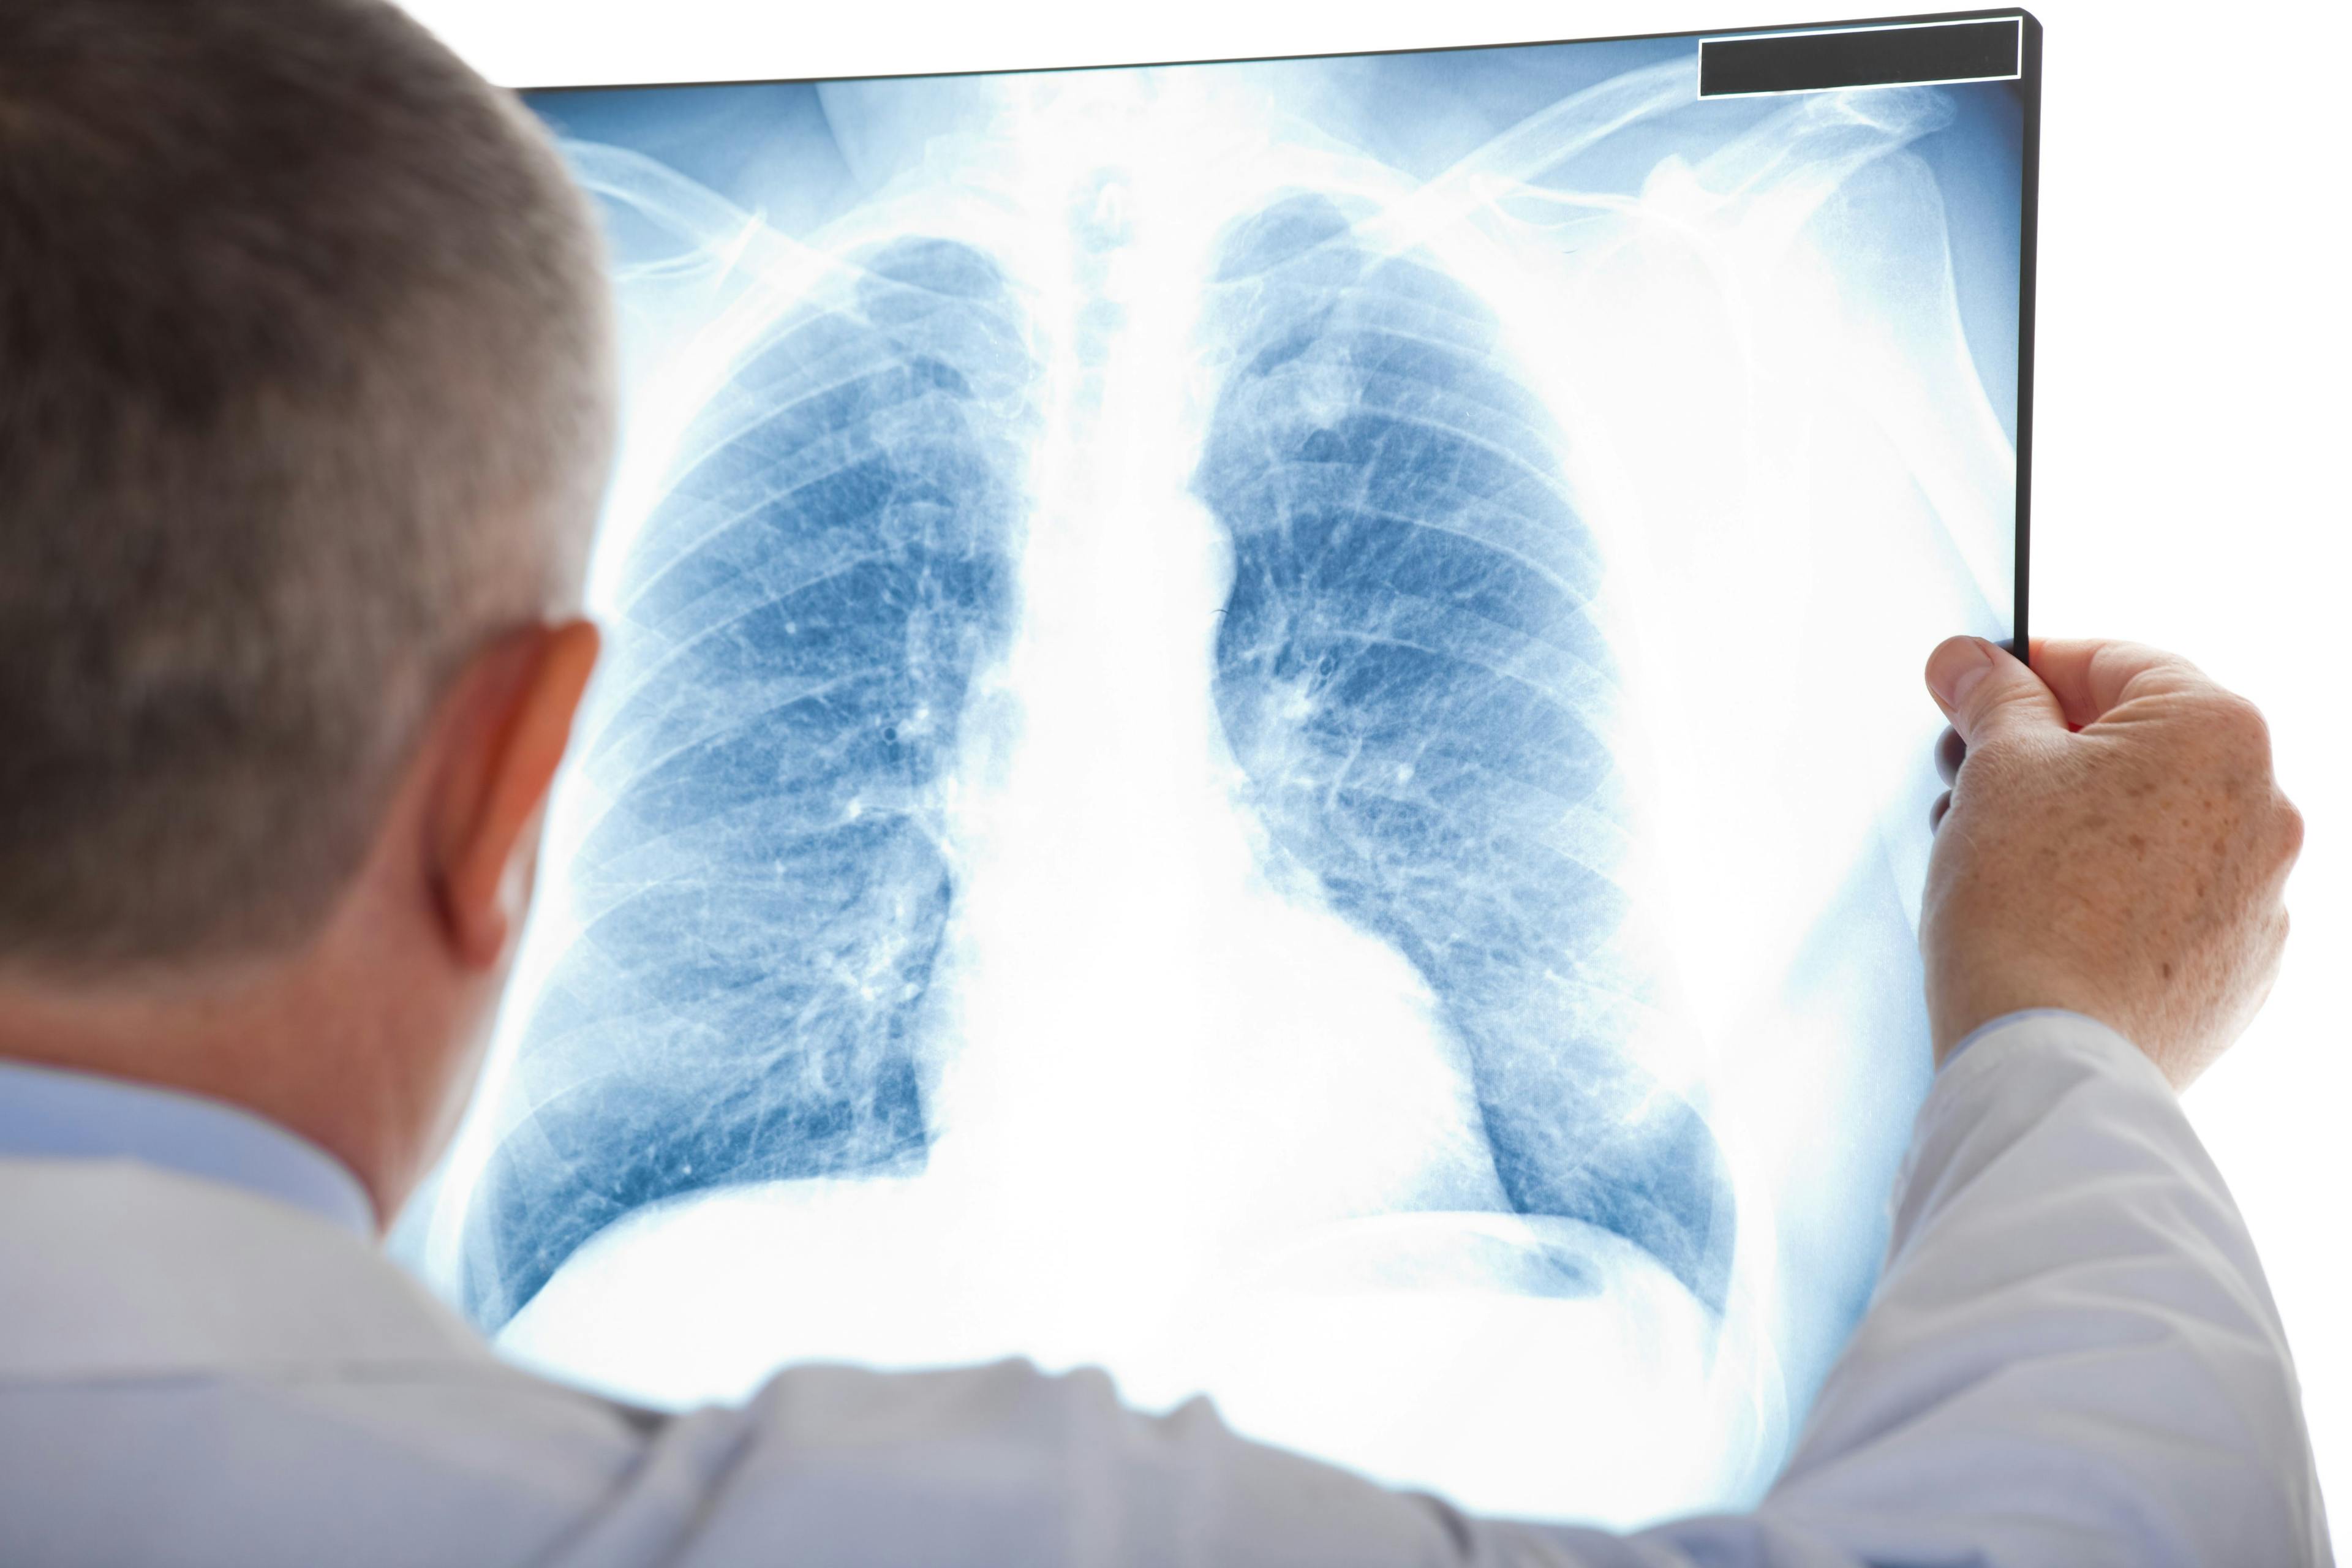 IVC Filter Could Cut Pulmonary Embolism Risk in Cancer-Related DVT